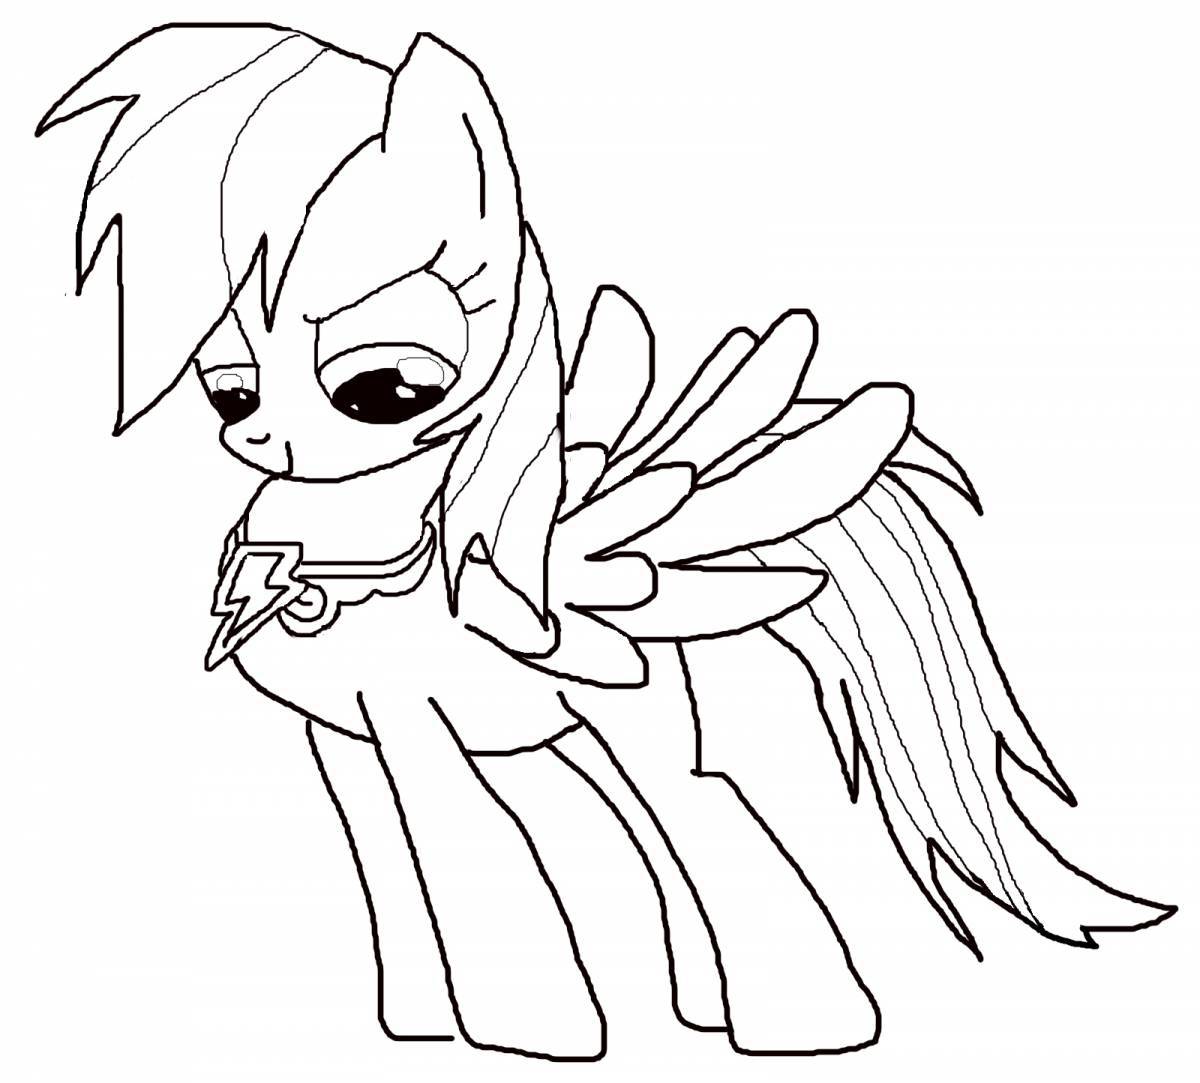 Coloring page lively my little pony